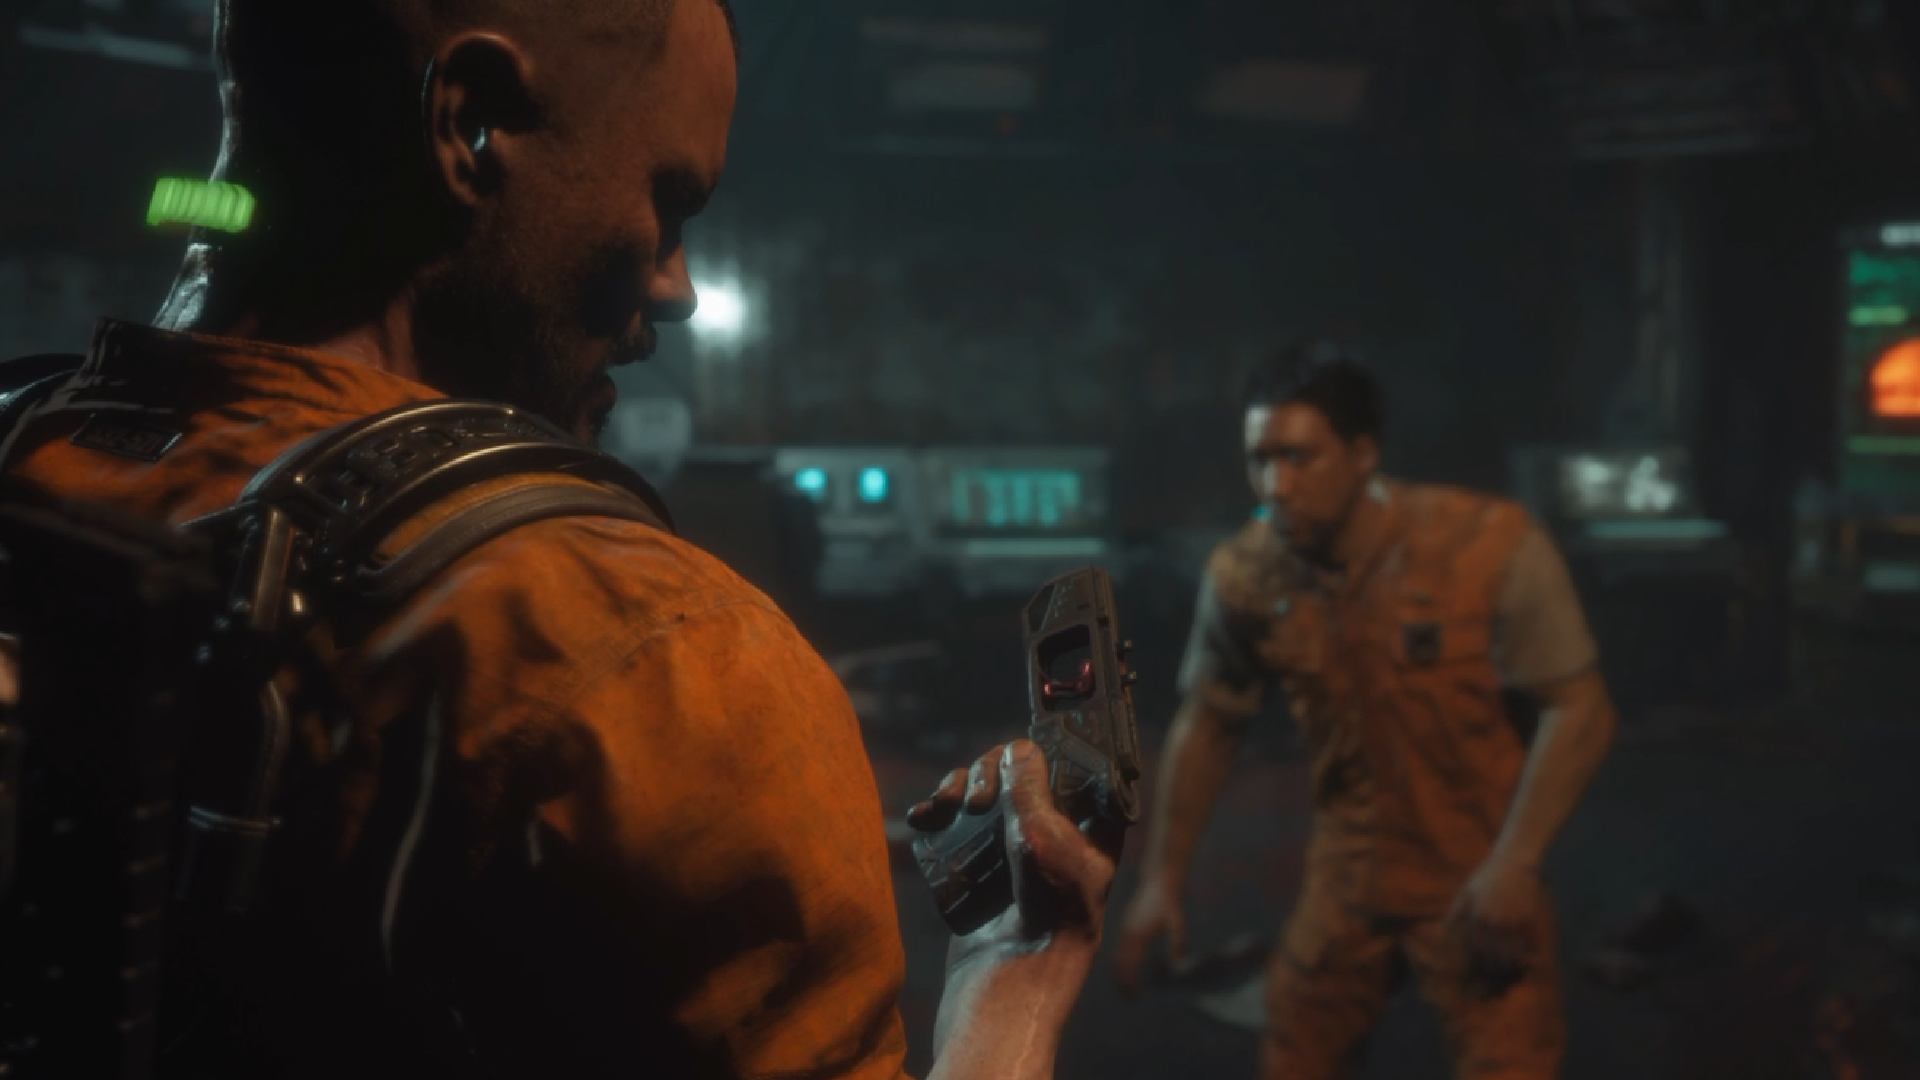 The Callisto Protocol Weapons: Jacob can be seen with a hand cannon